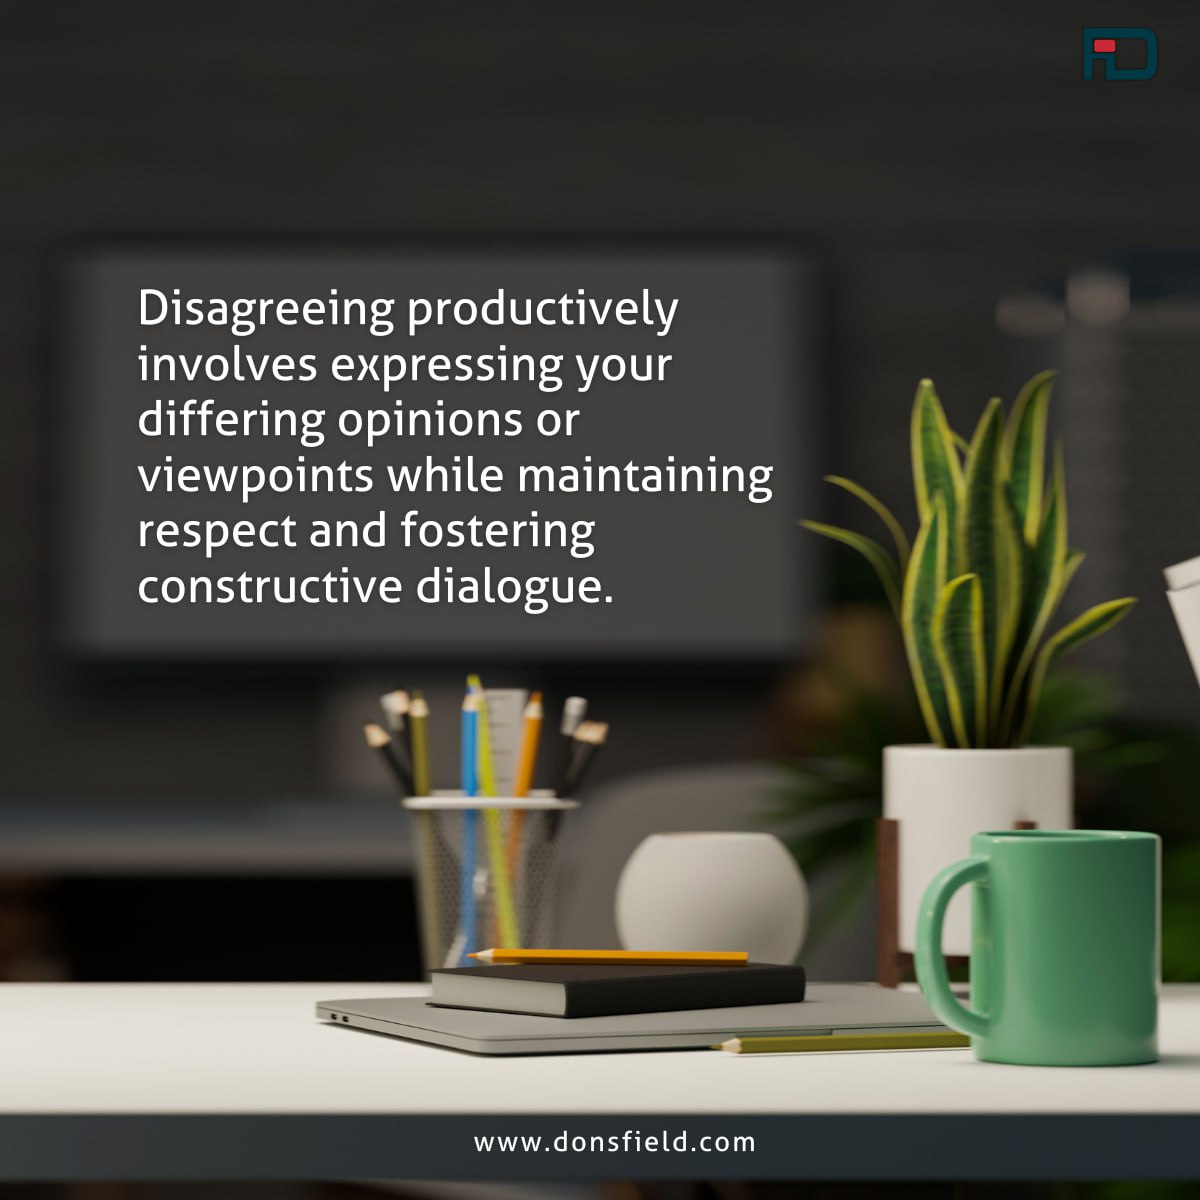 Disagreeing productively is an important skill in any professional or personal setting. 

#ProductiveDisagreement #ConstructiveDebate #RespectfulDisagreement #OpenMinds #CollaborativeDialogue  #skill #goals #innovation #solution #linkedin